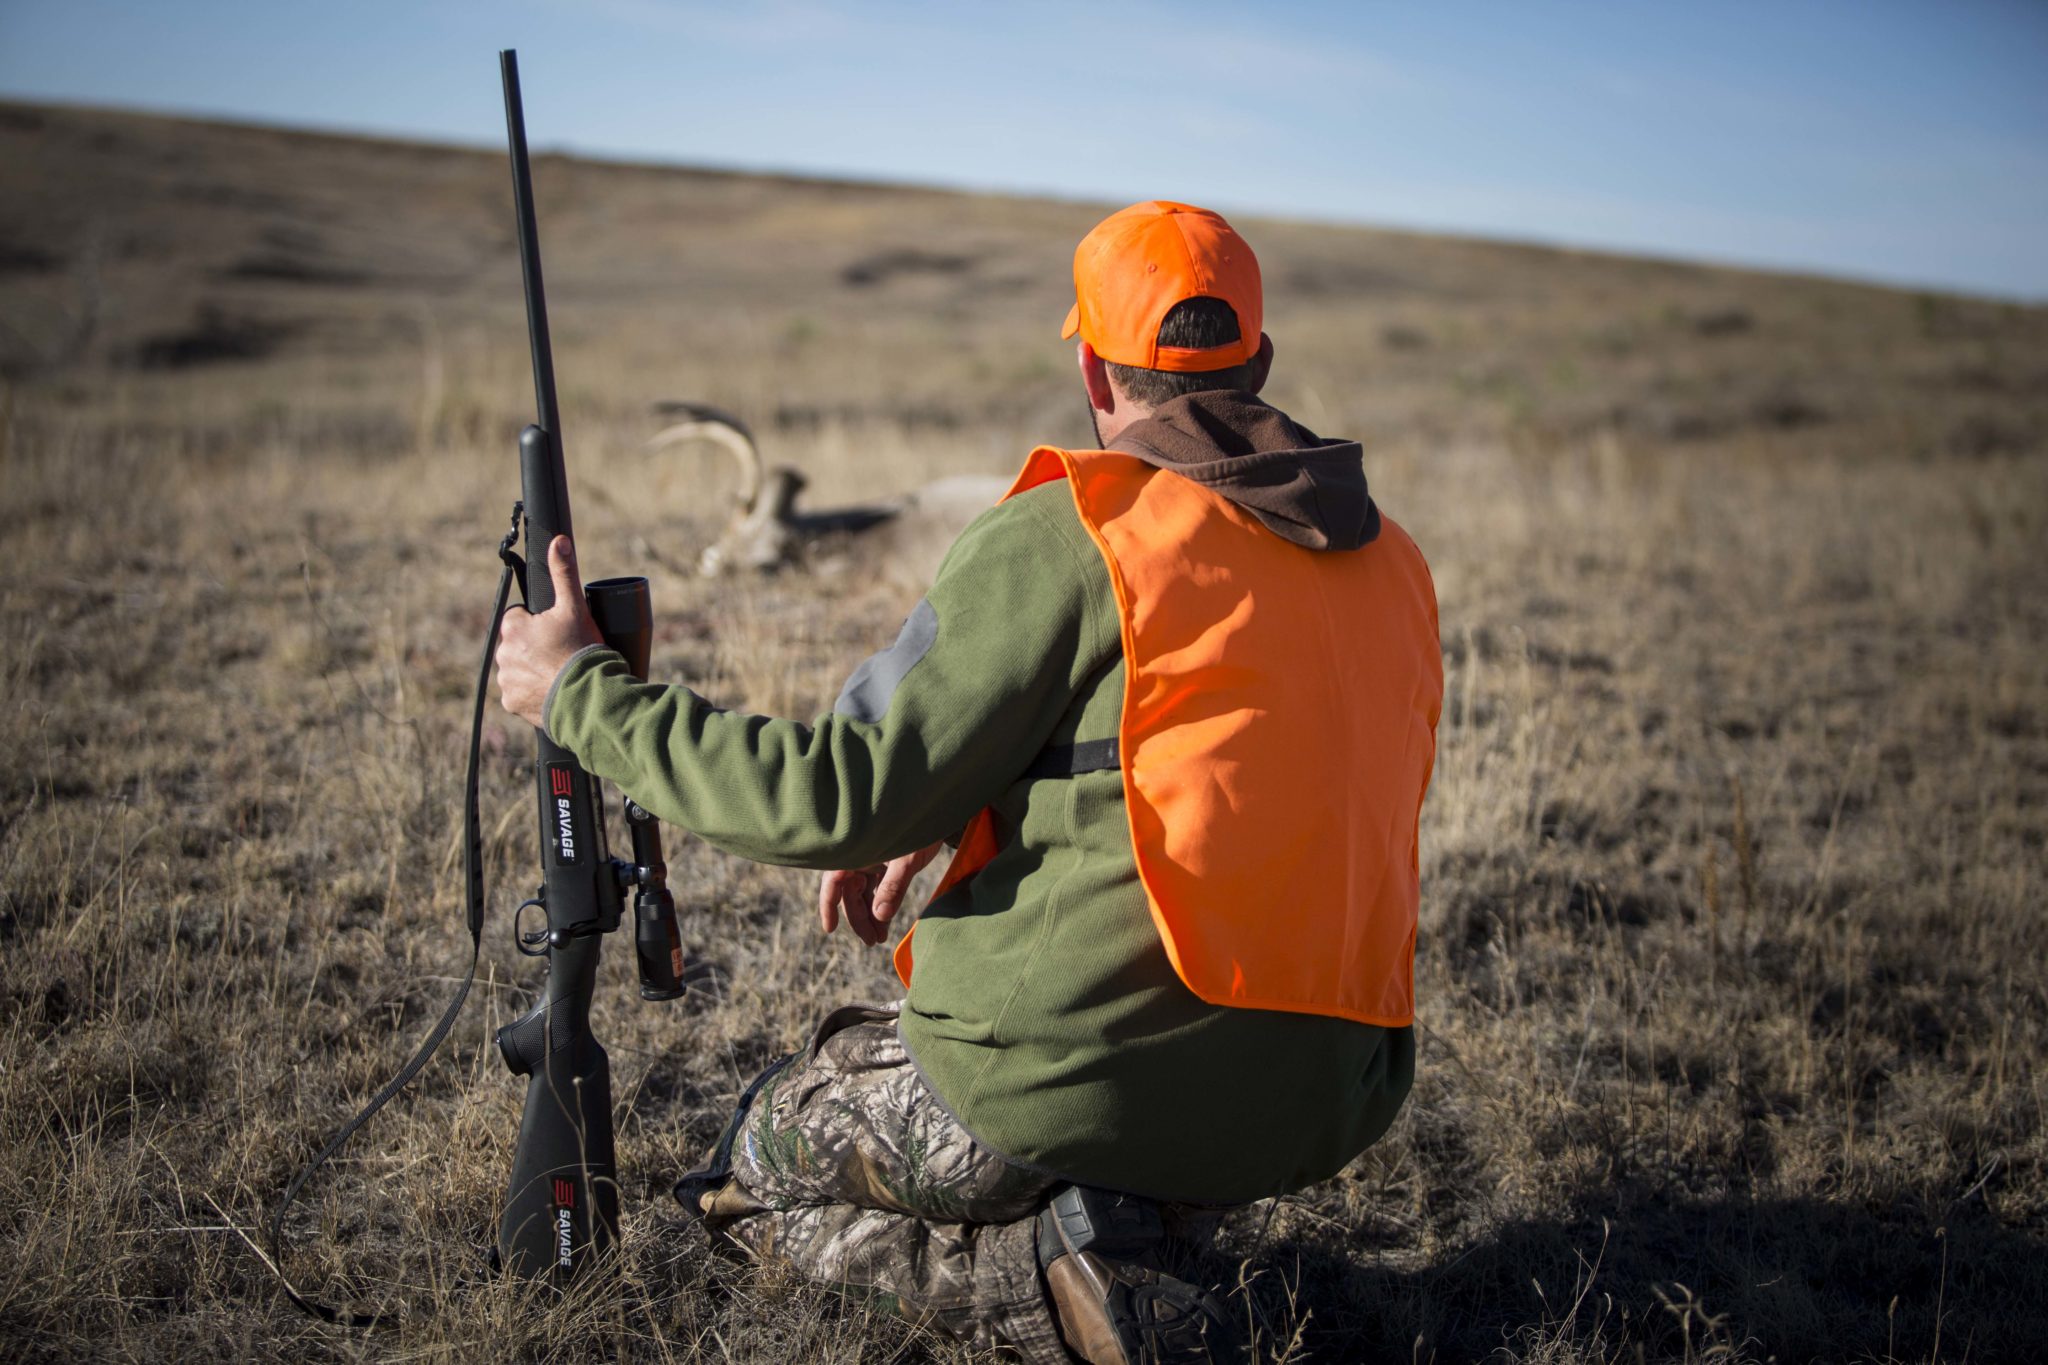 U.S. Fish and Wildlife Service finalizes 2022 Hunt Fish Rule with lead ammo restrictions